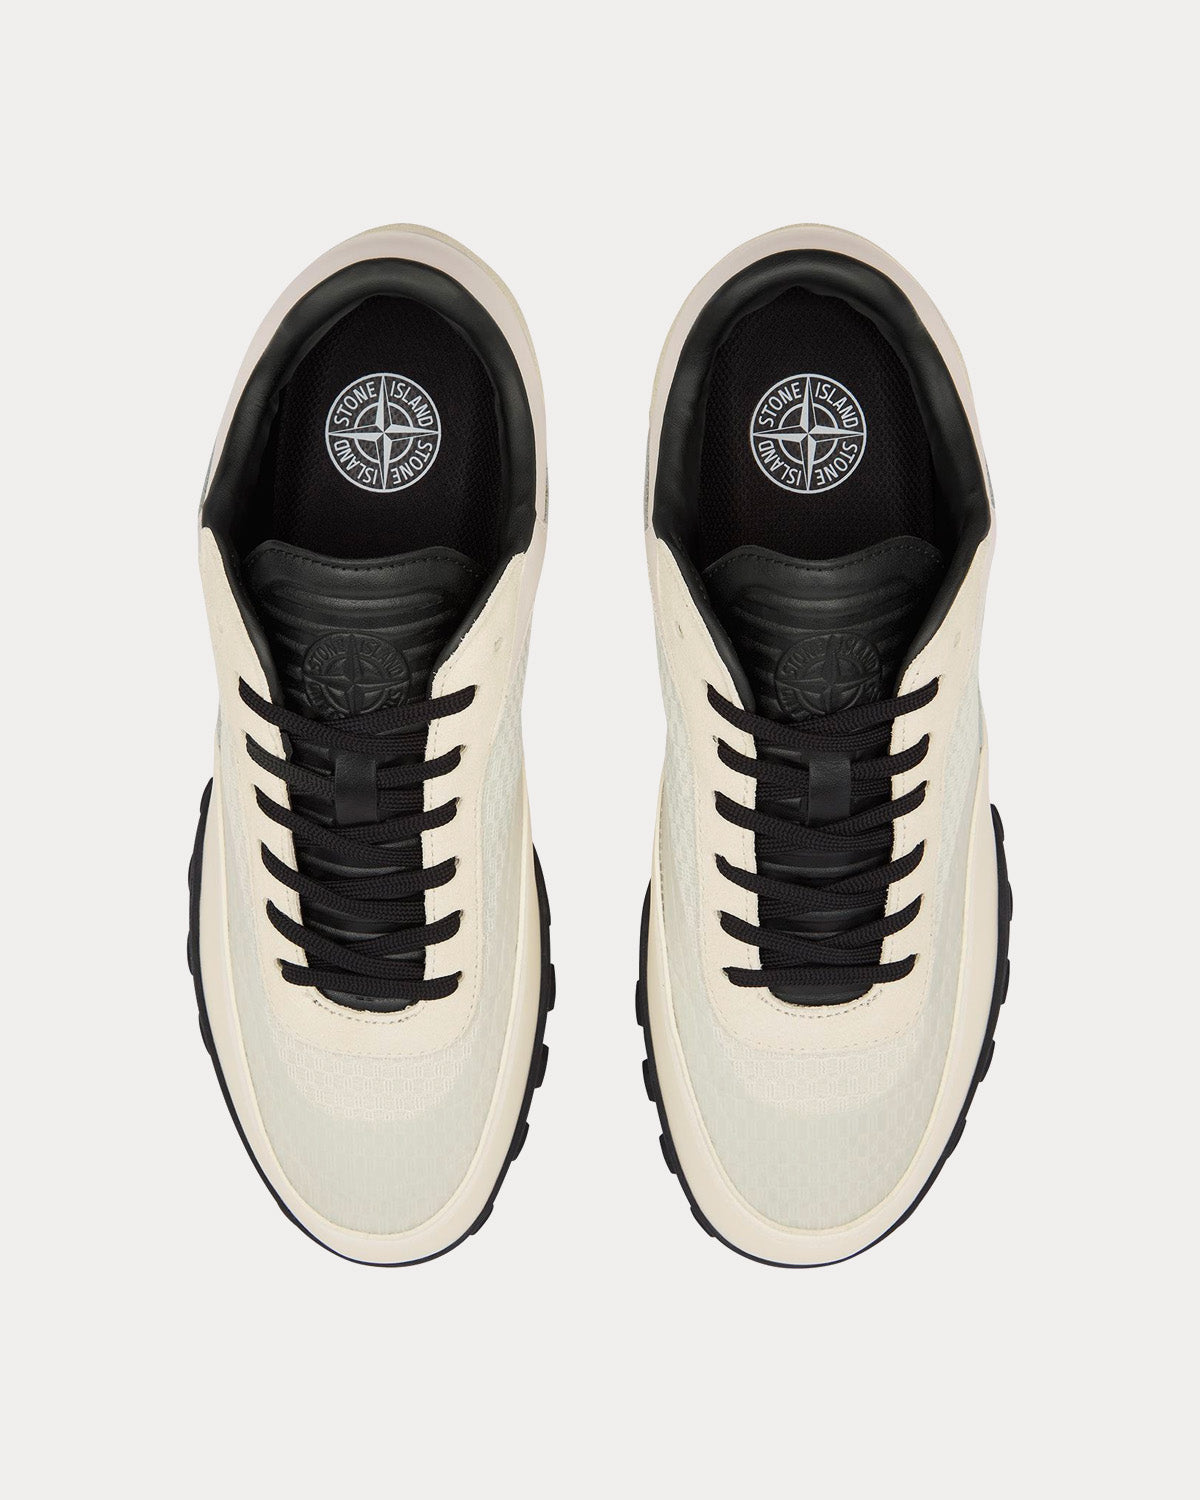 Stone Island - S0202 Ivory Low Top Sneakers